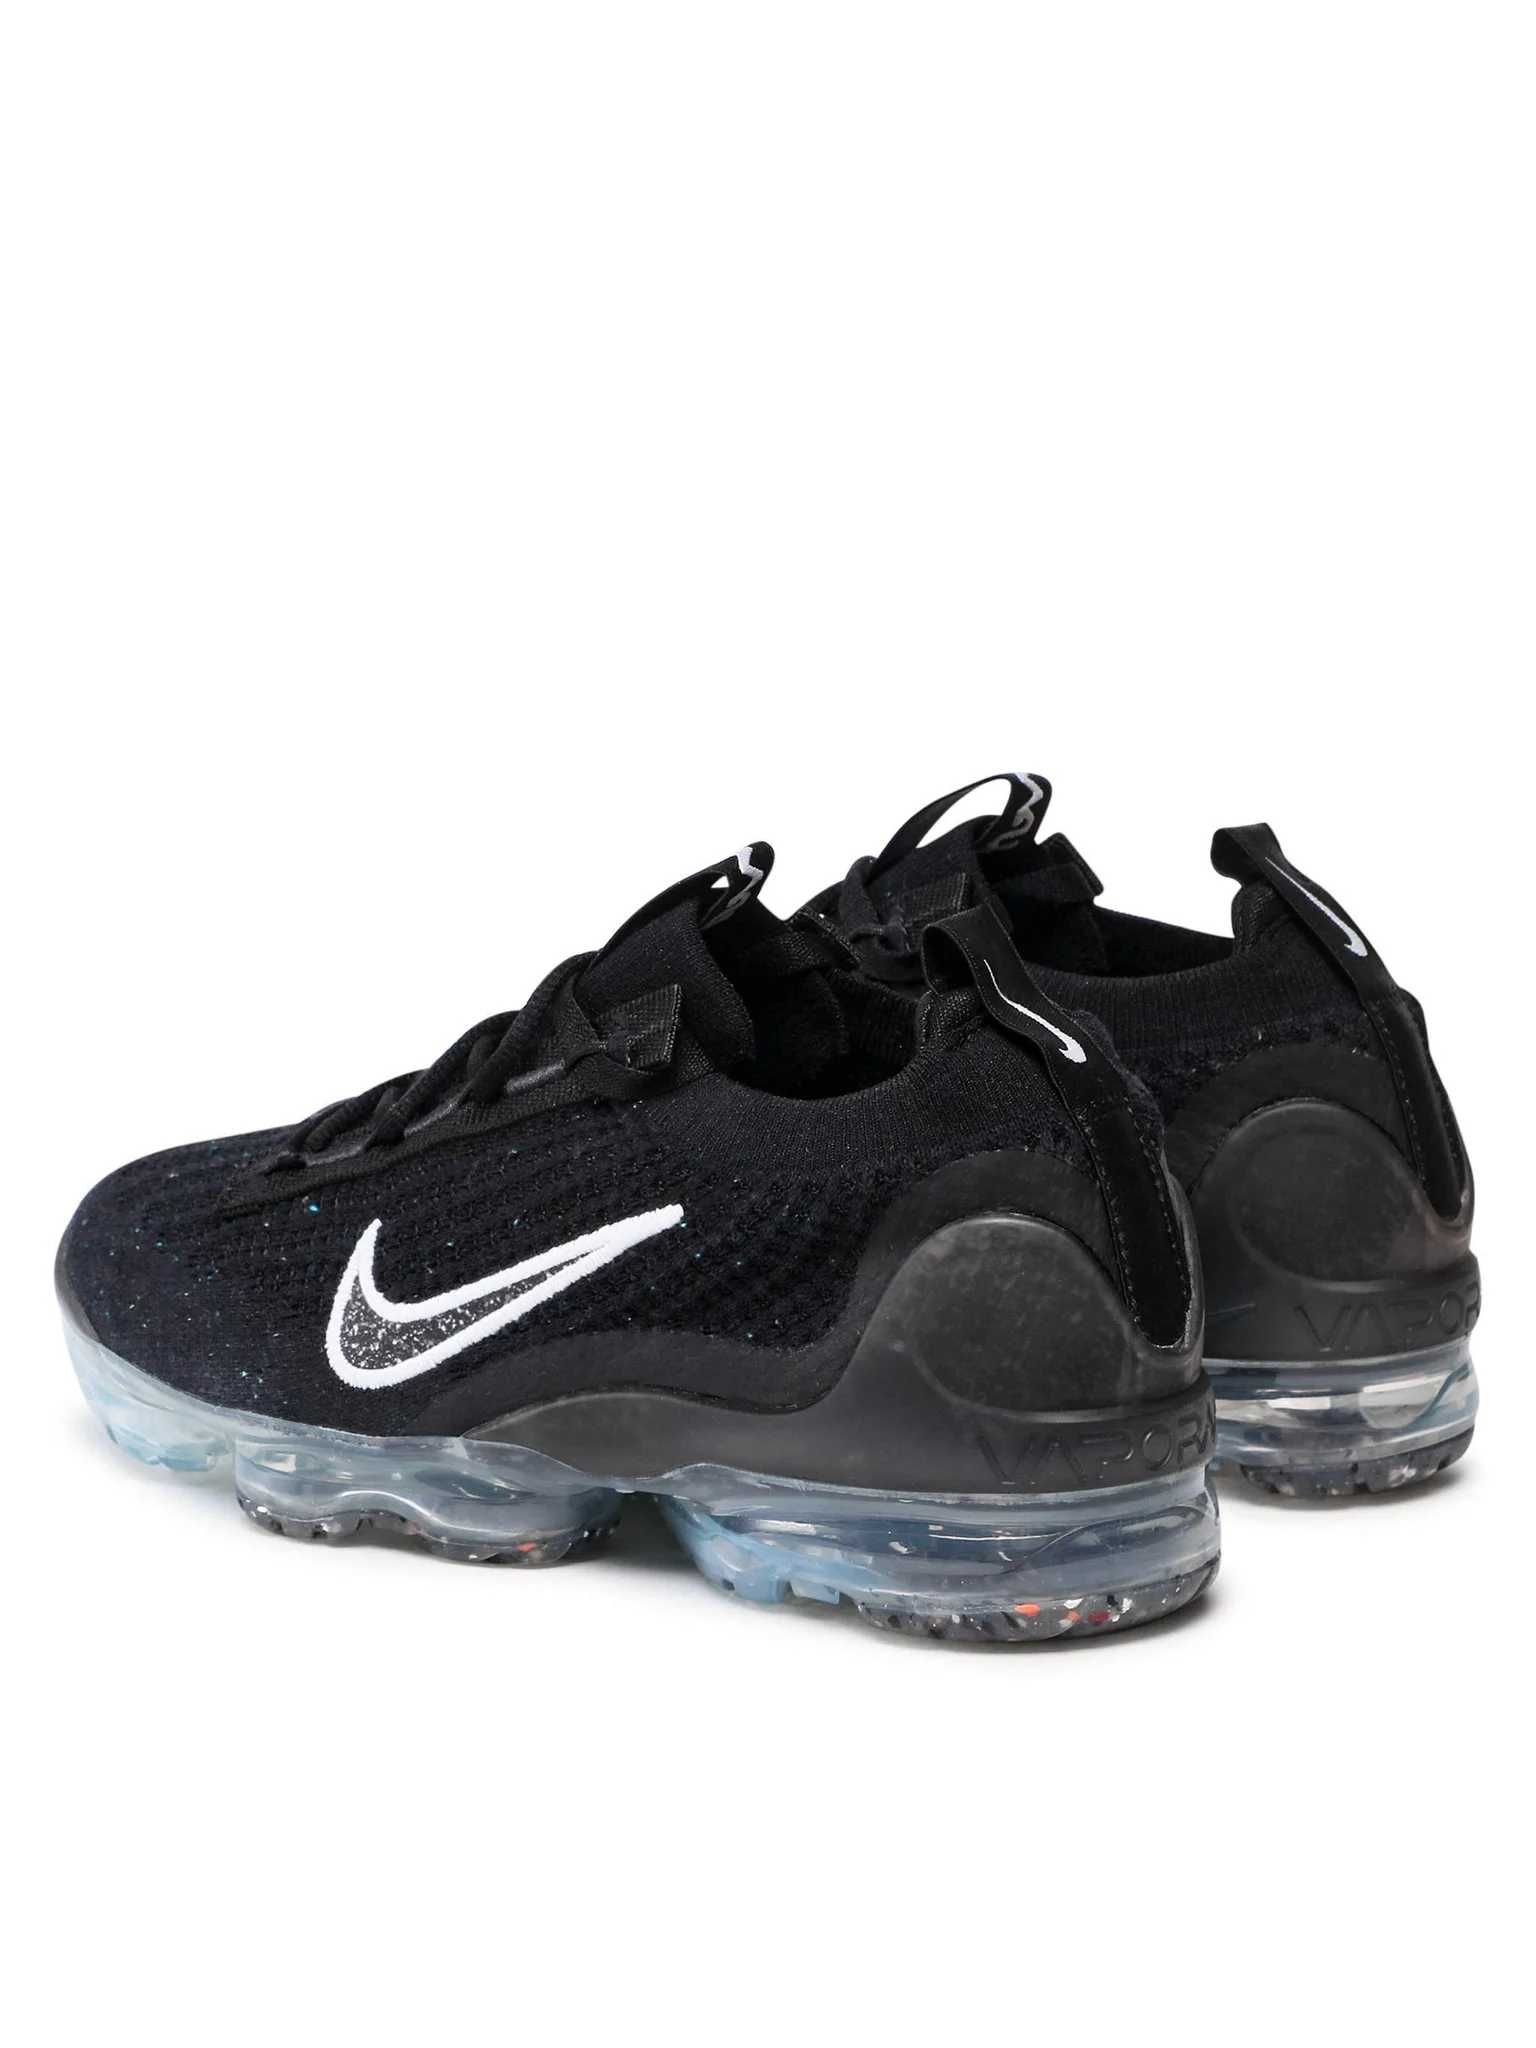 Nike Air Vapormax Black and White 2021 / Outlet